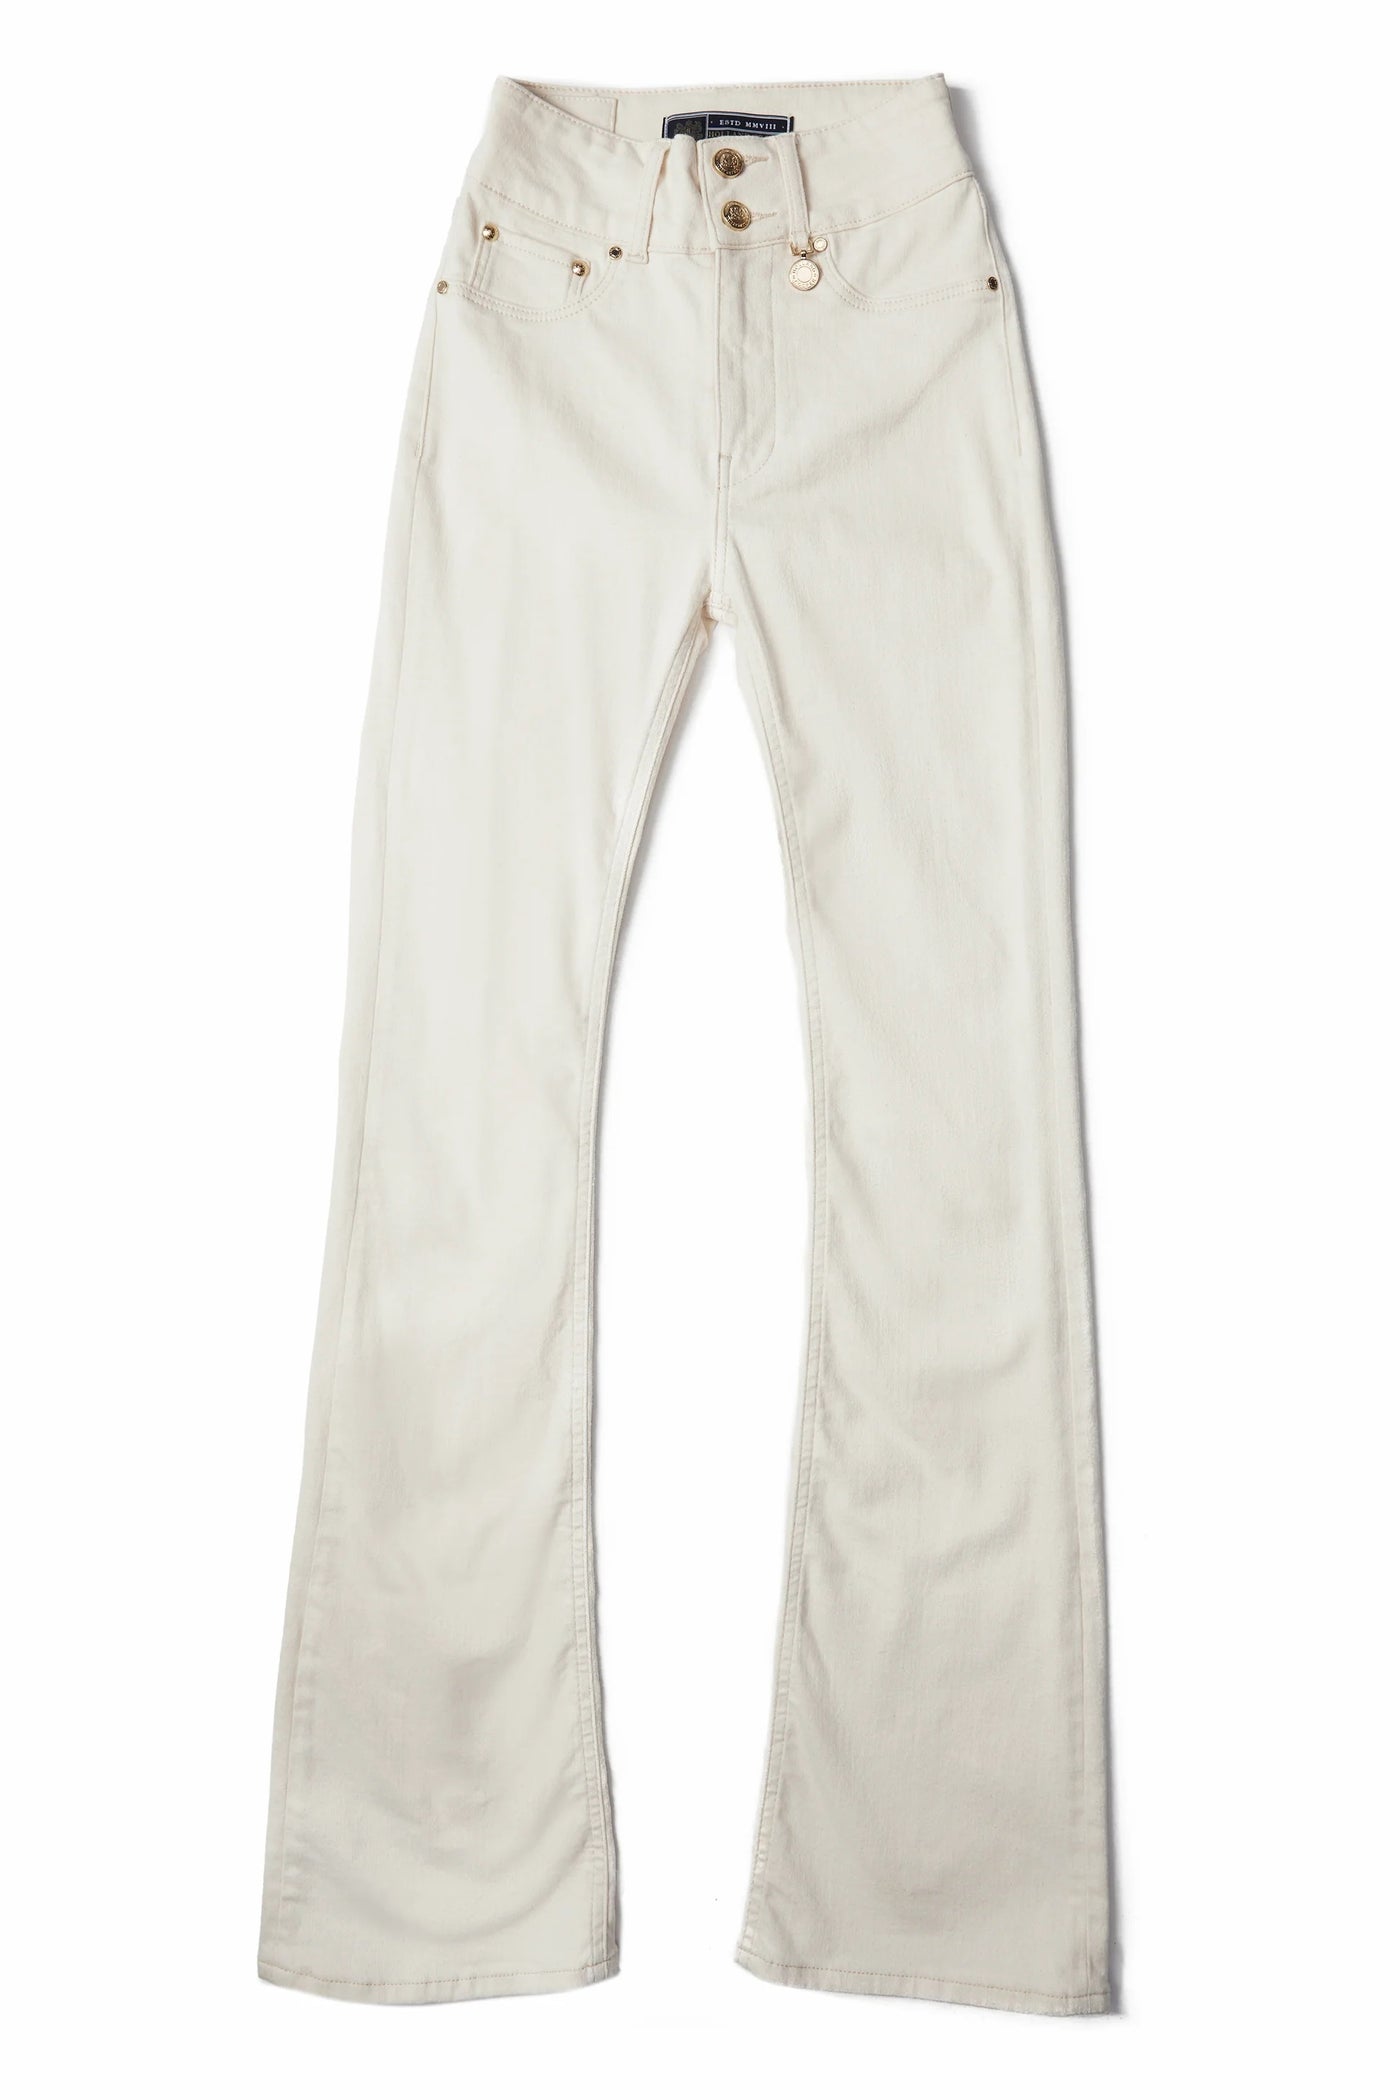 Holland Cooper High Rise Flared Jean in Oatmeal Front